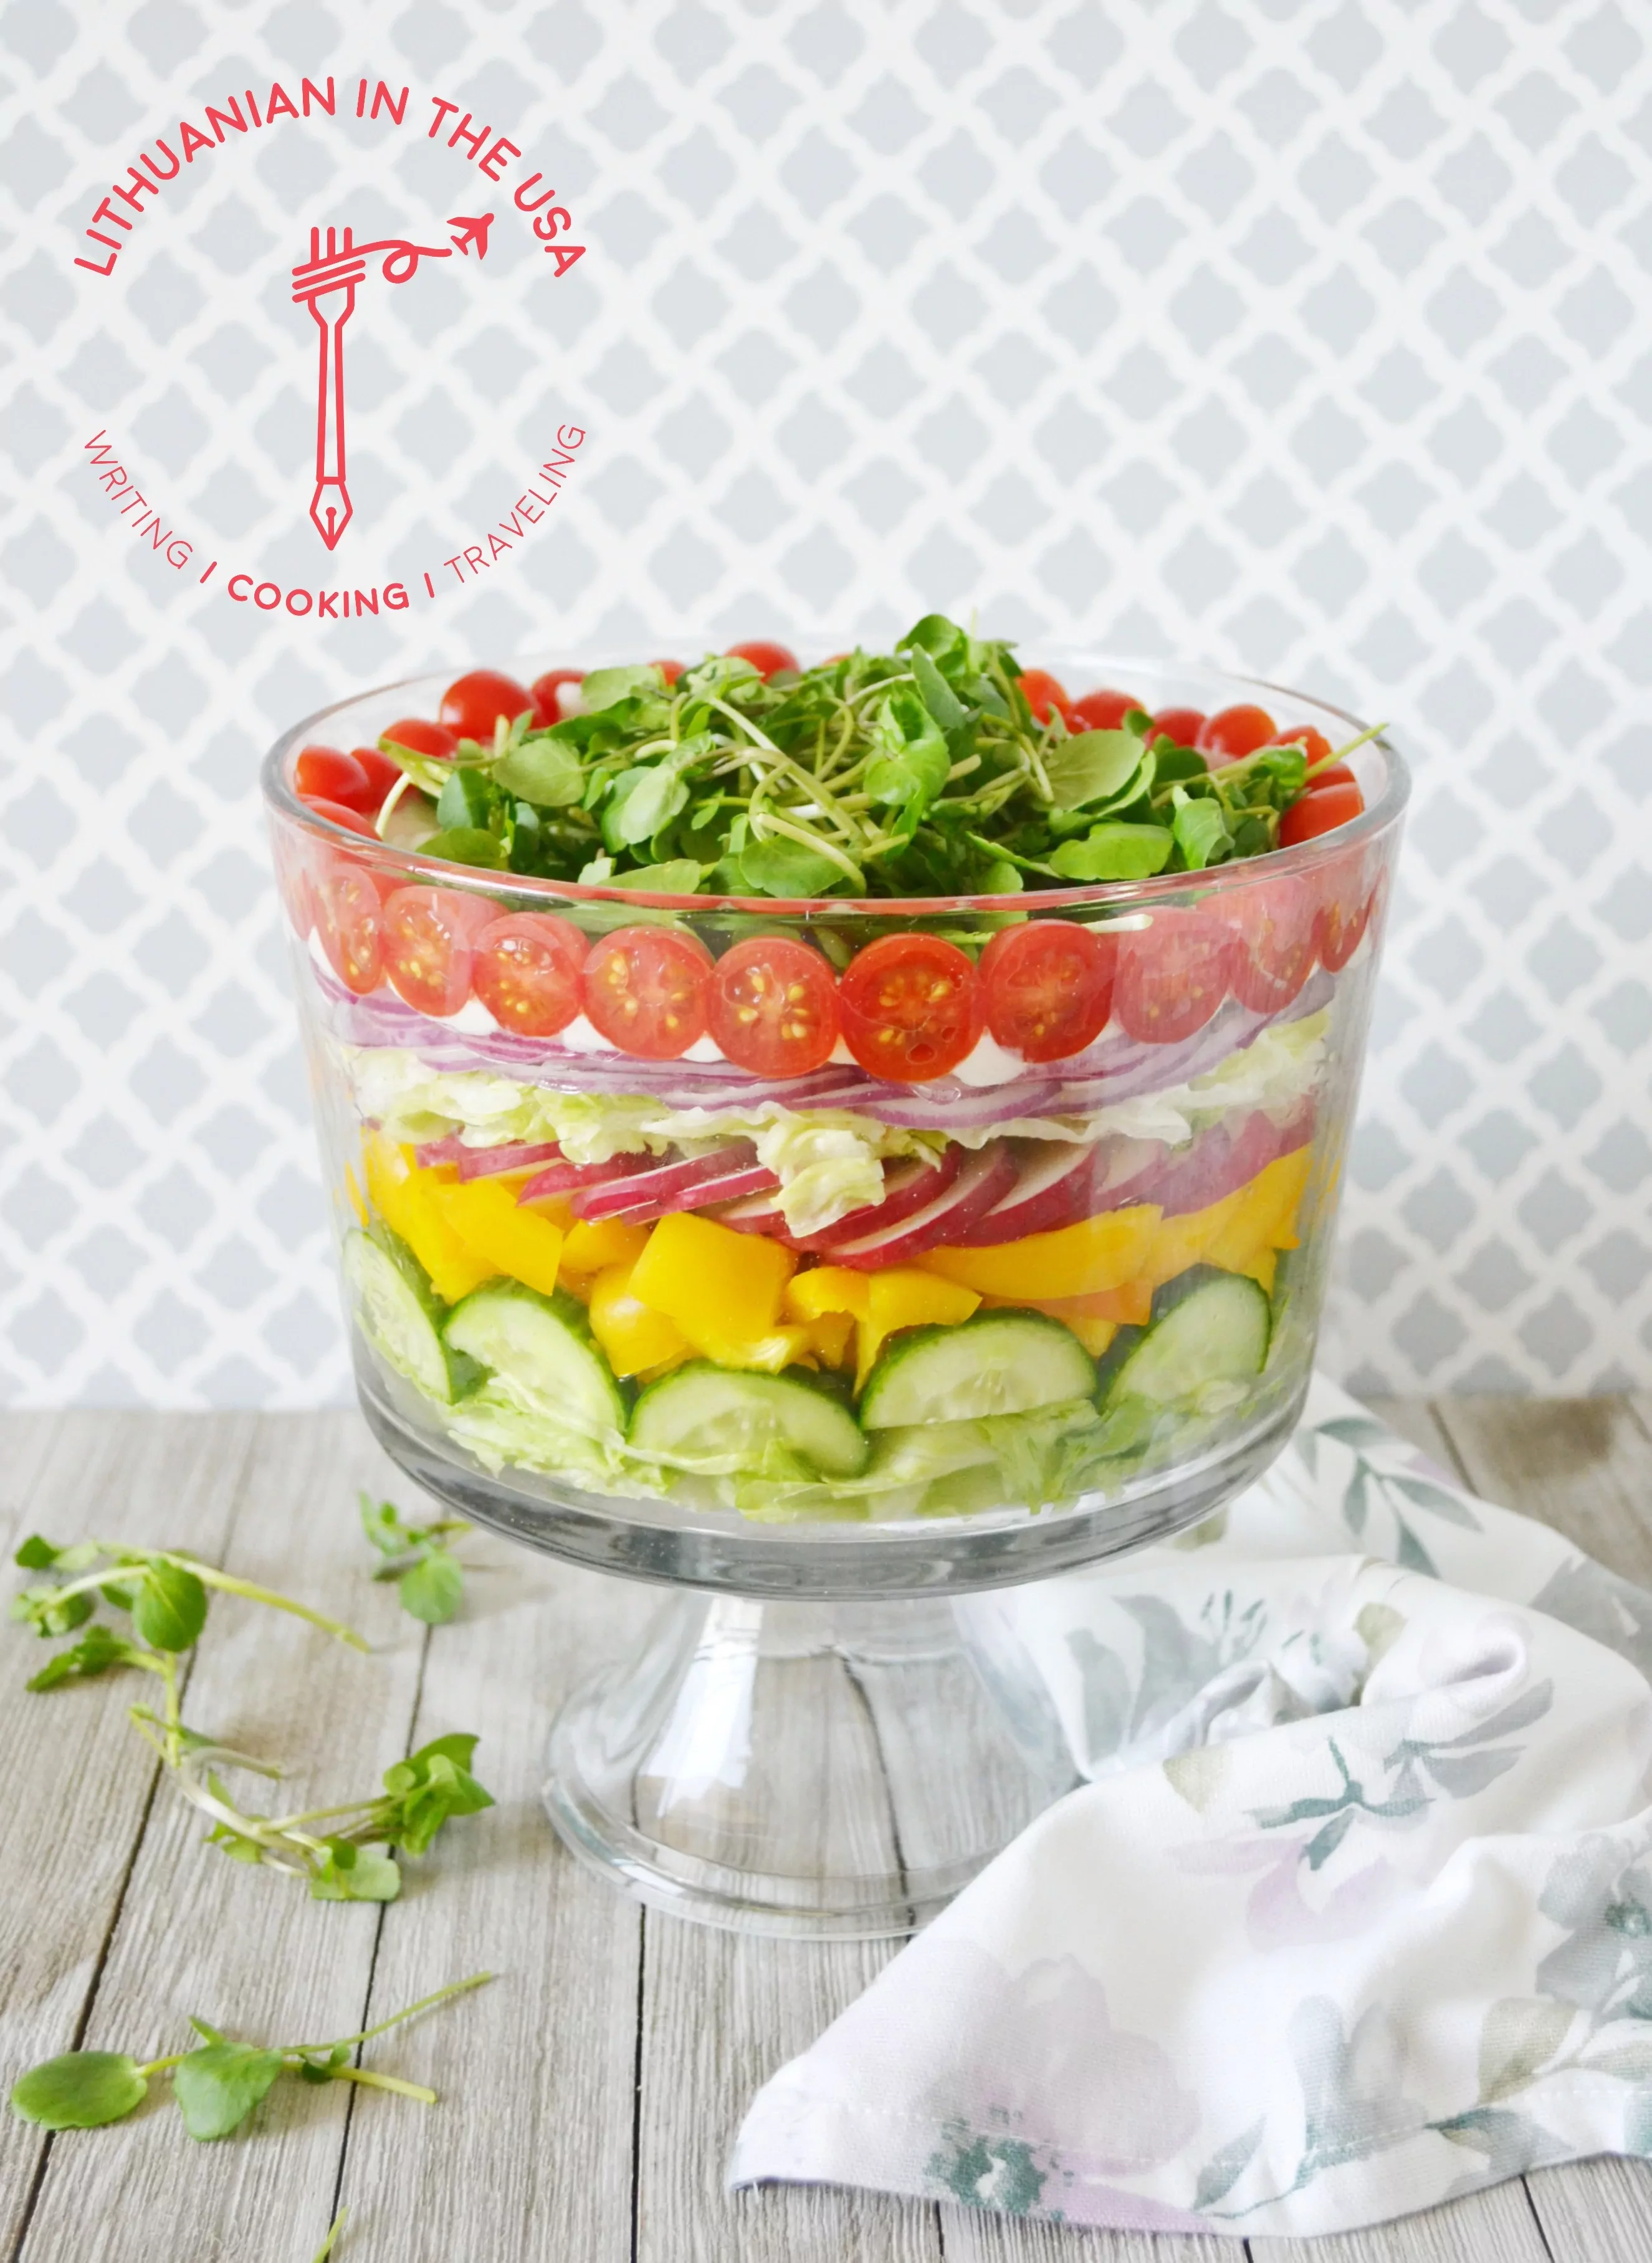 Layered Salad with Homemade Dressing